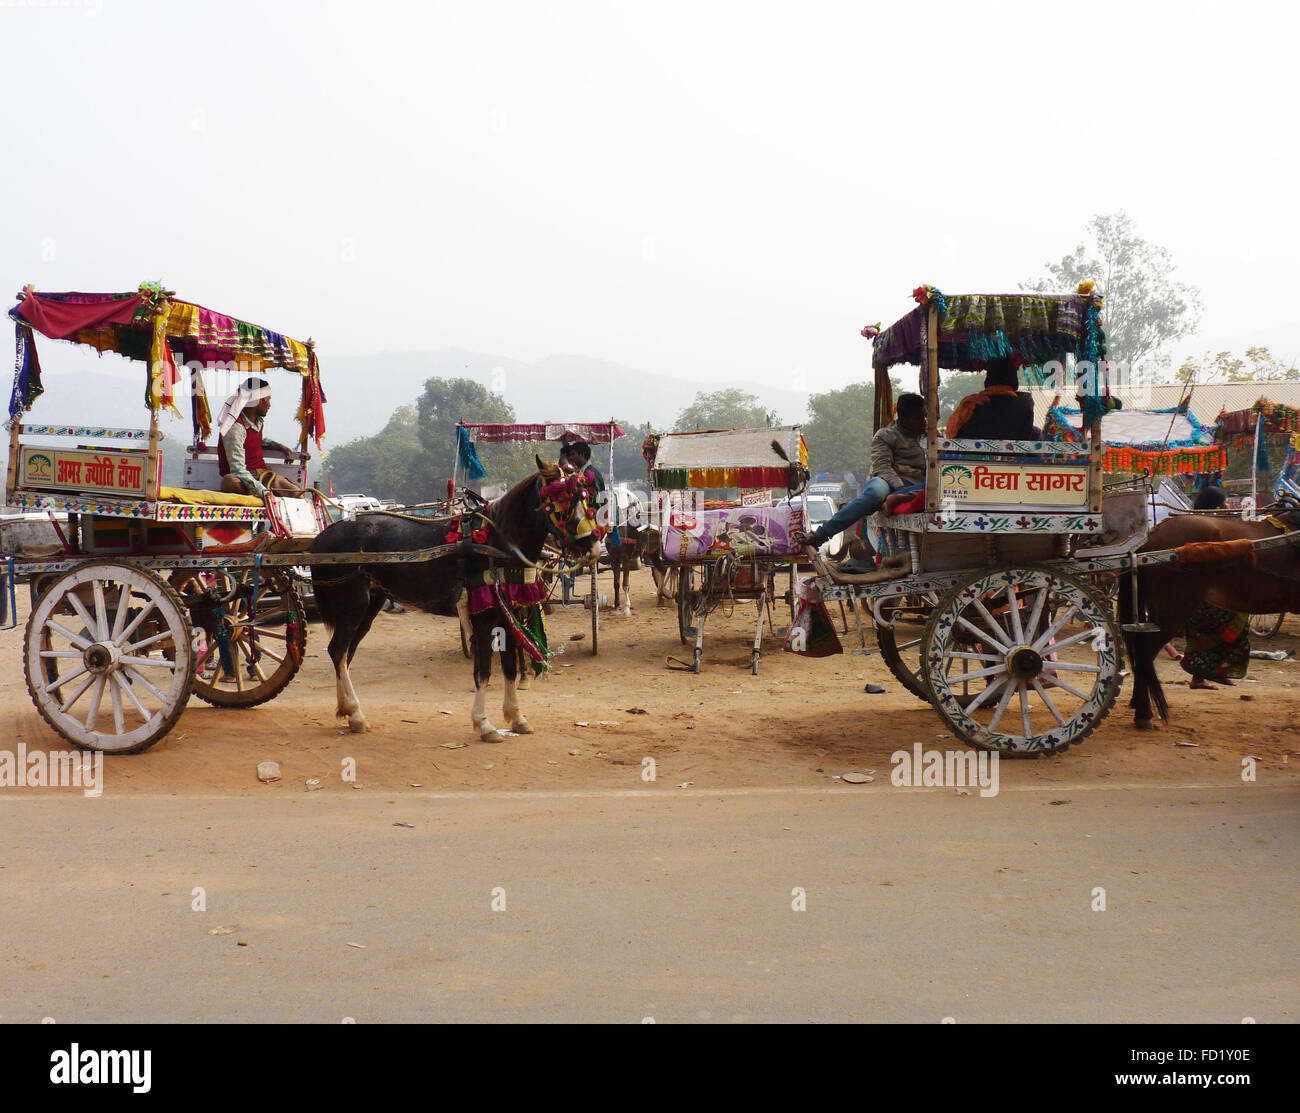 Beautiful Horse Carriages or Tangas Parked and Waiting for Passengers in a Tourist Town of India Stock Photo